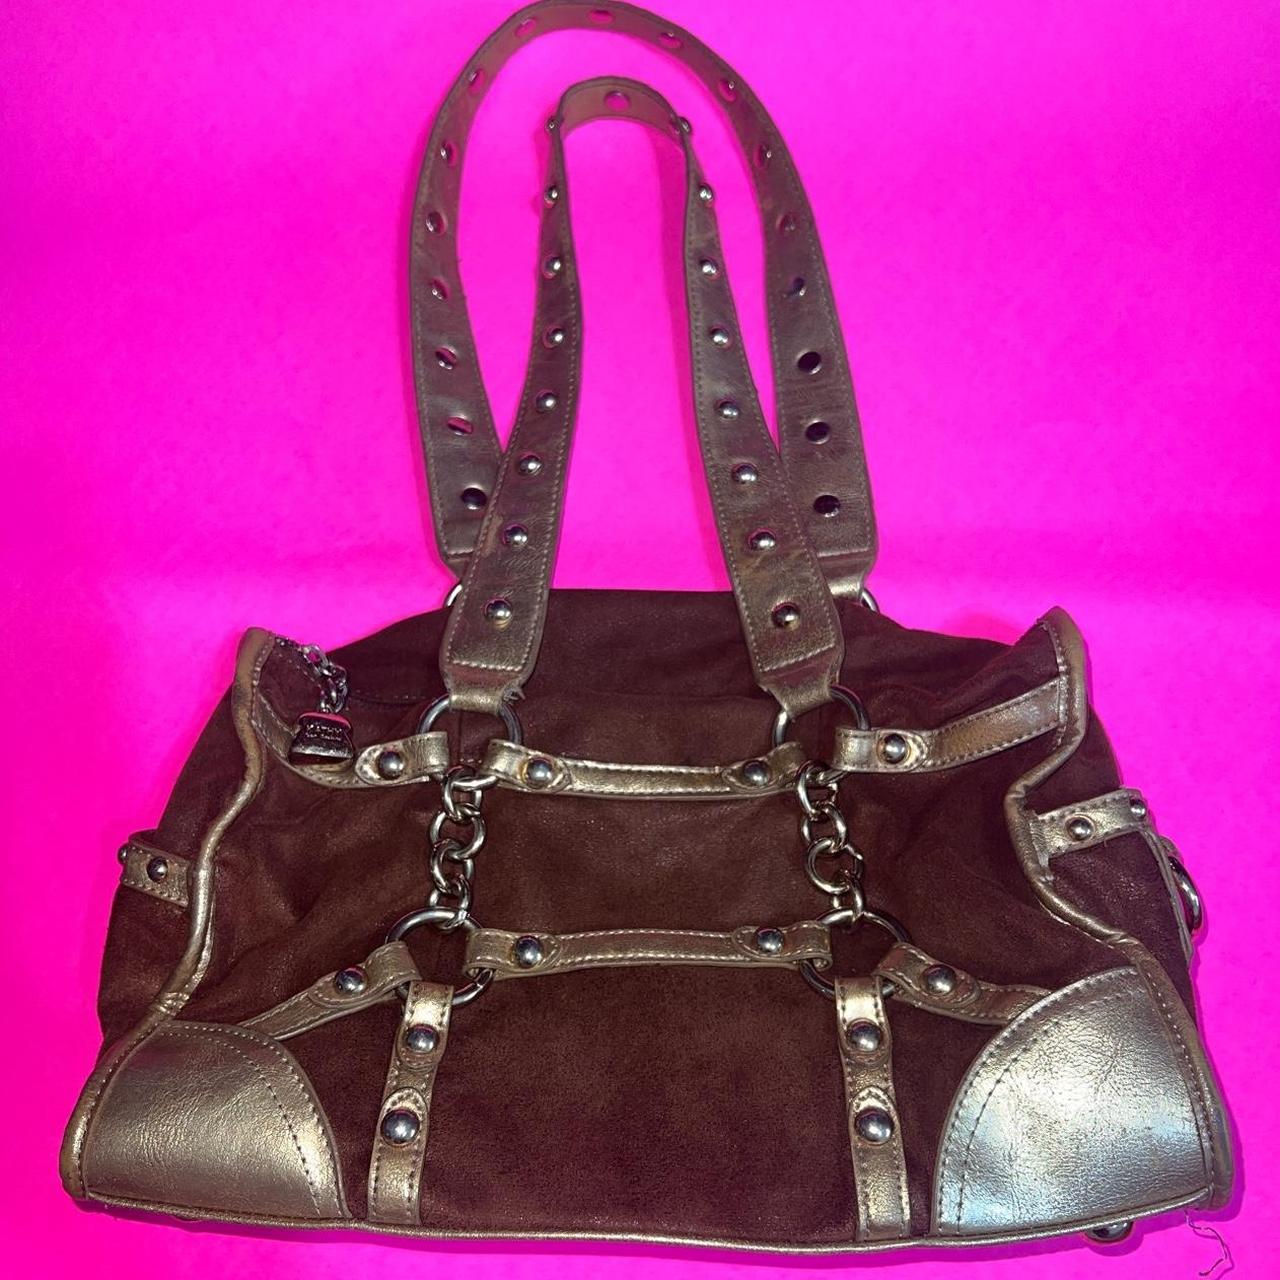 Sold at Auction: Kathy Van Zeeland Bag with Wallet LIKE NEW! LOT 1307